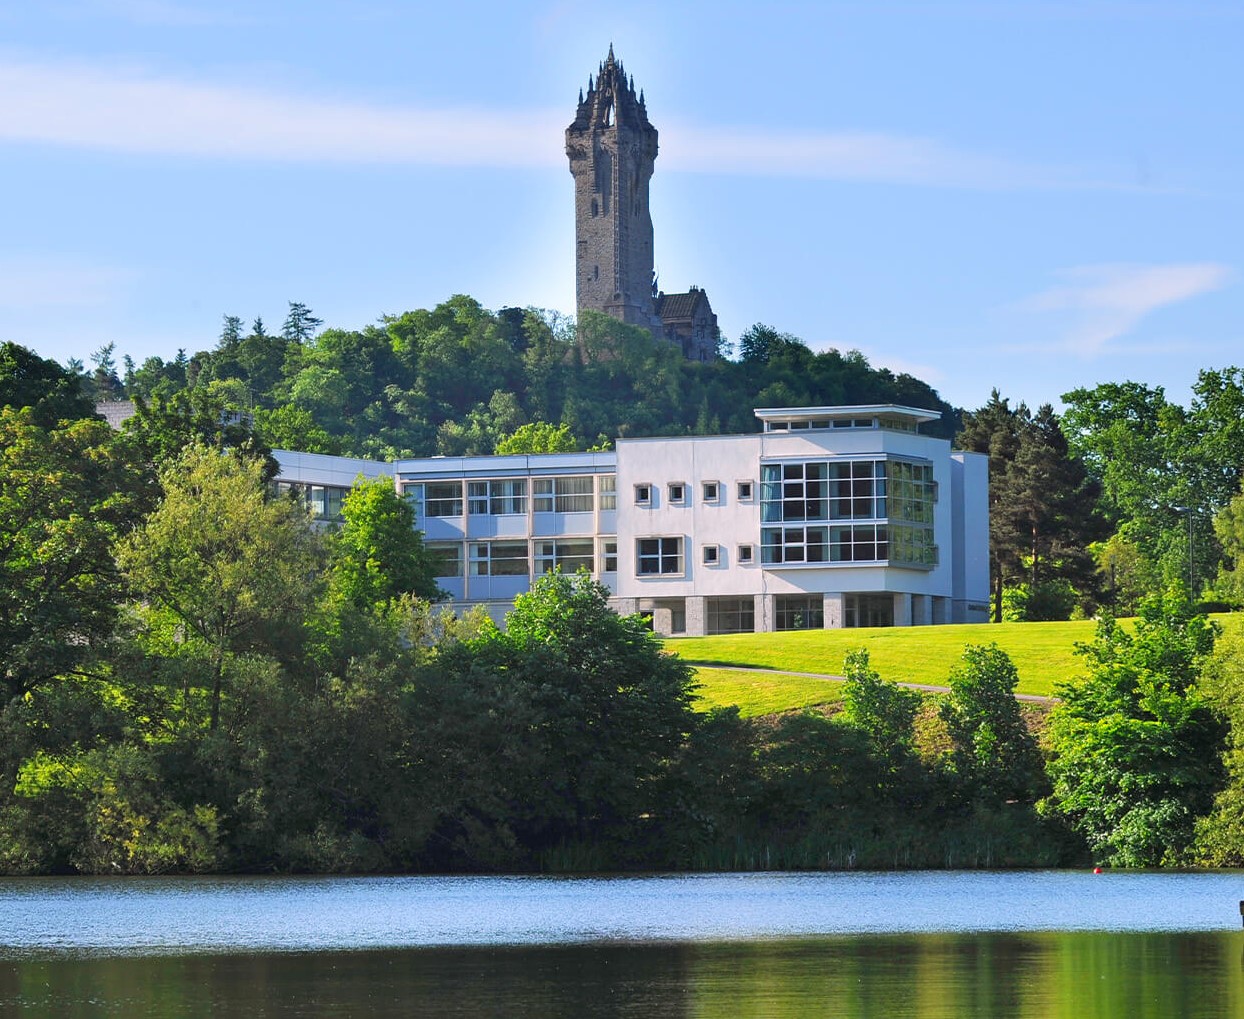 Image of Stirling University campus - very green and leafy with a white building in front of the historic Wallace monument